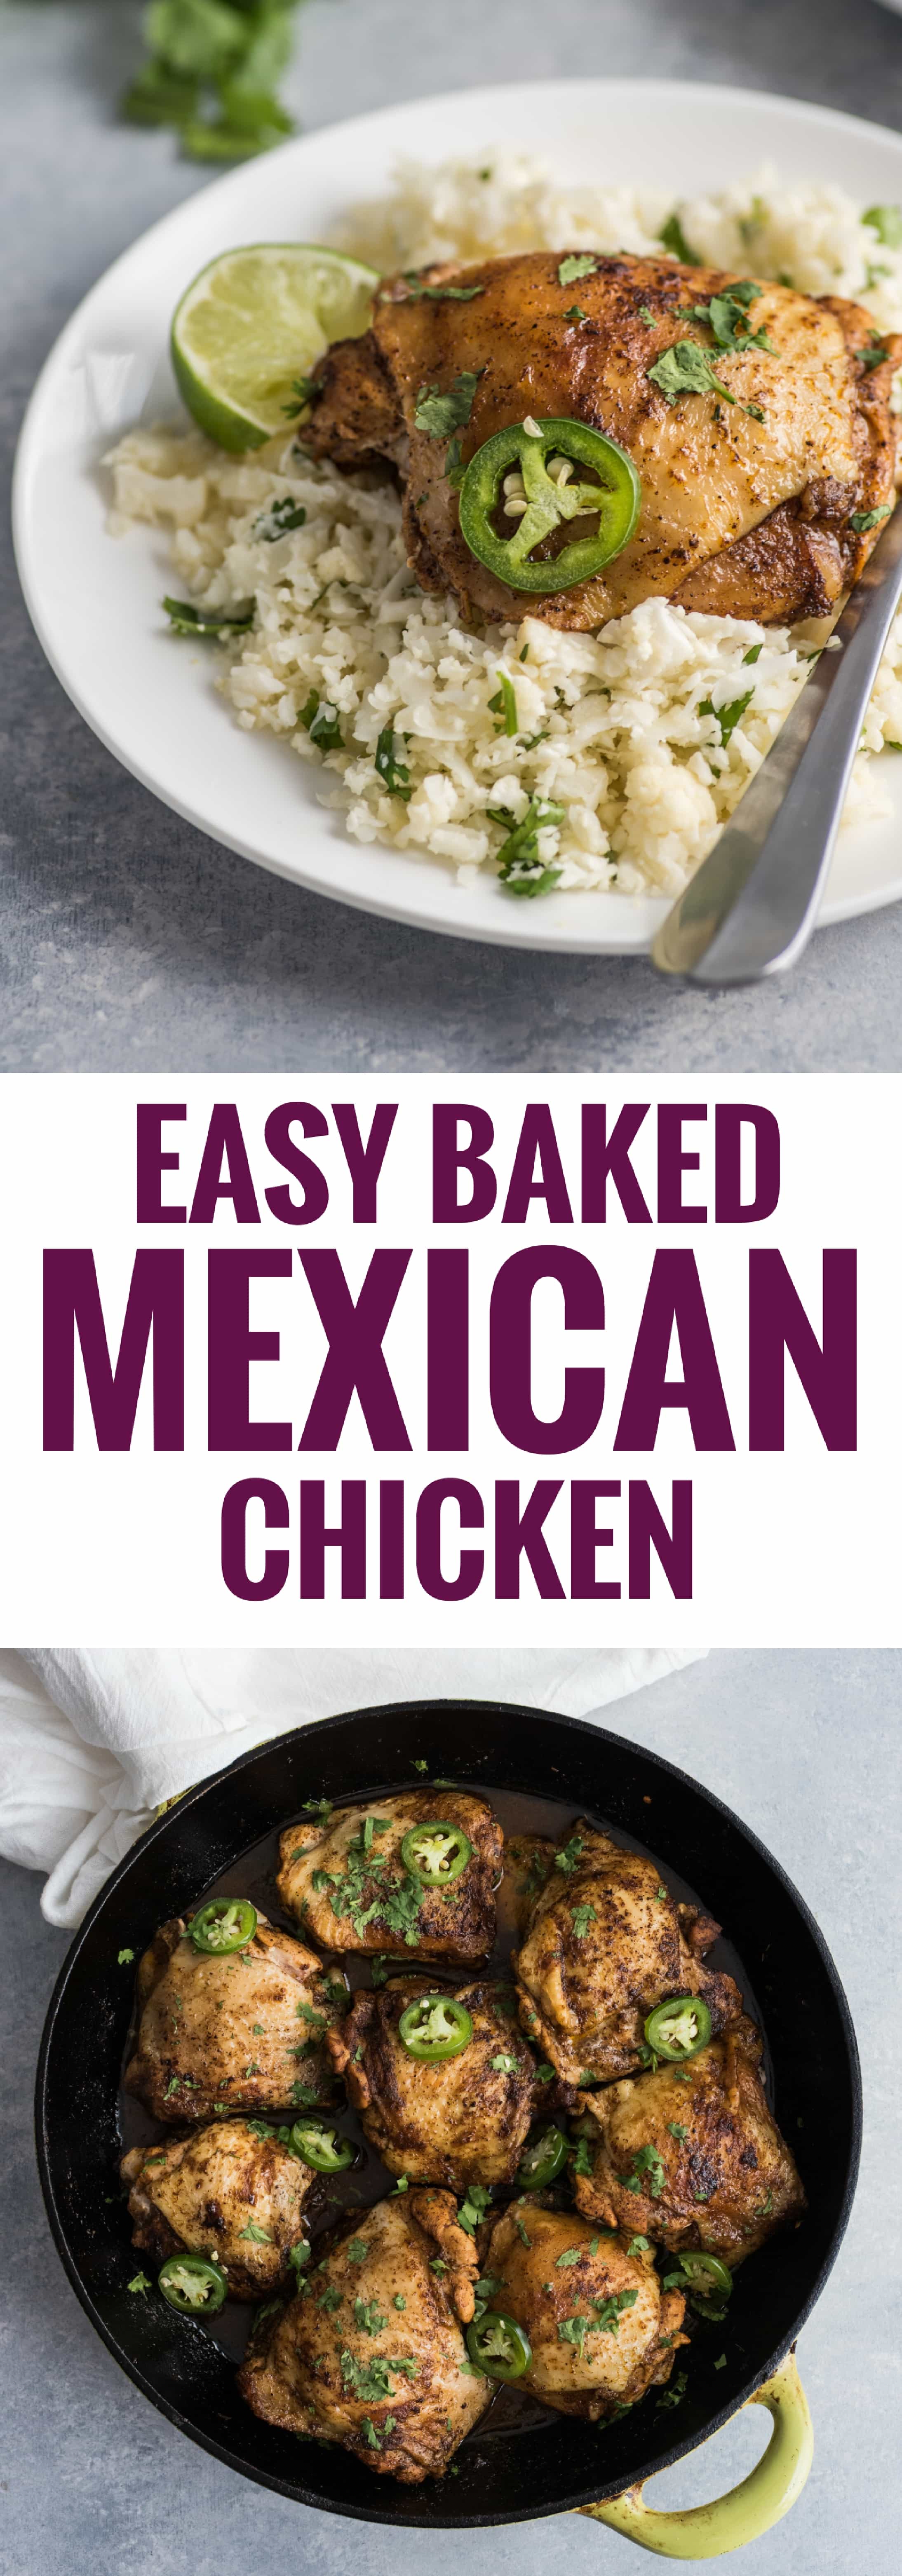 Easy Baked Mexican Chicken - Isabel Eats